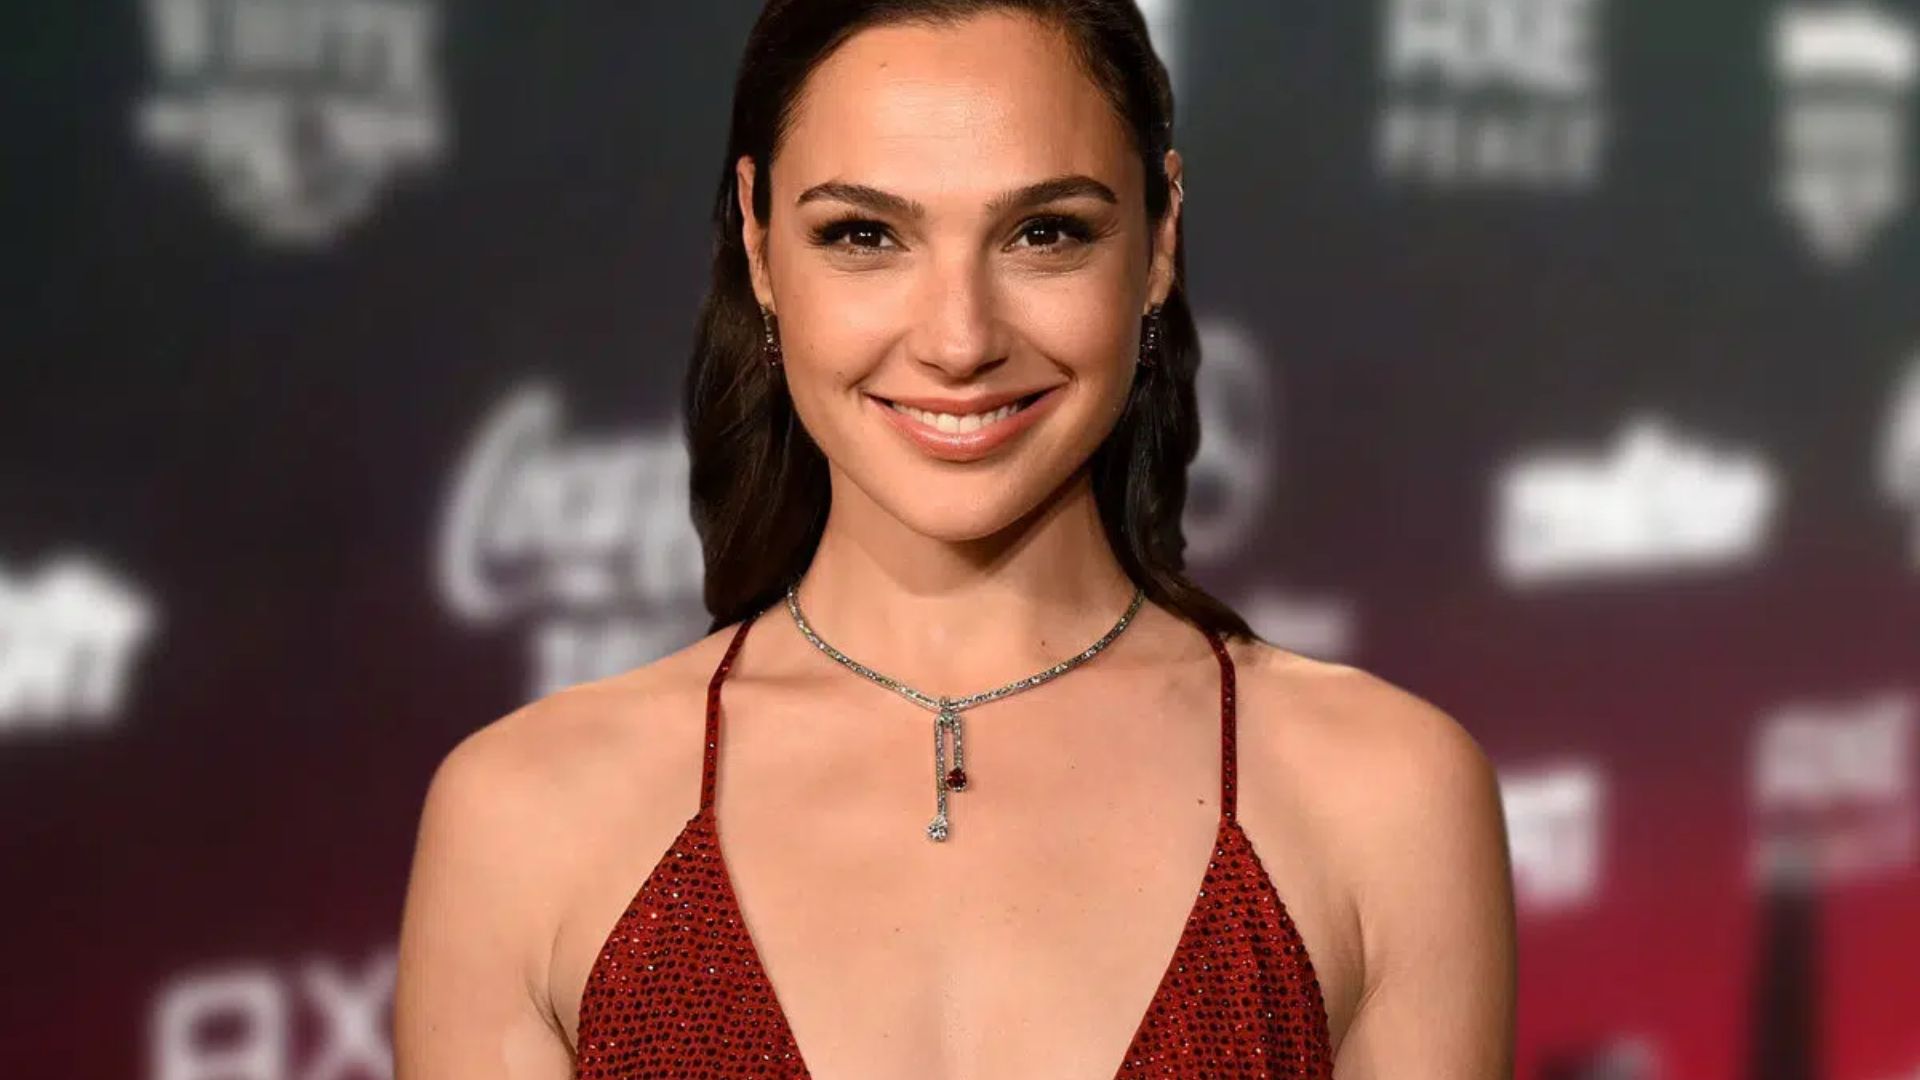 Gal Gadot With A Smiling Face